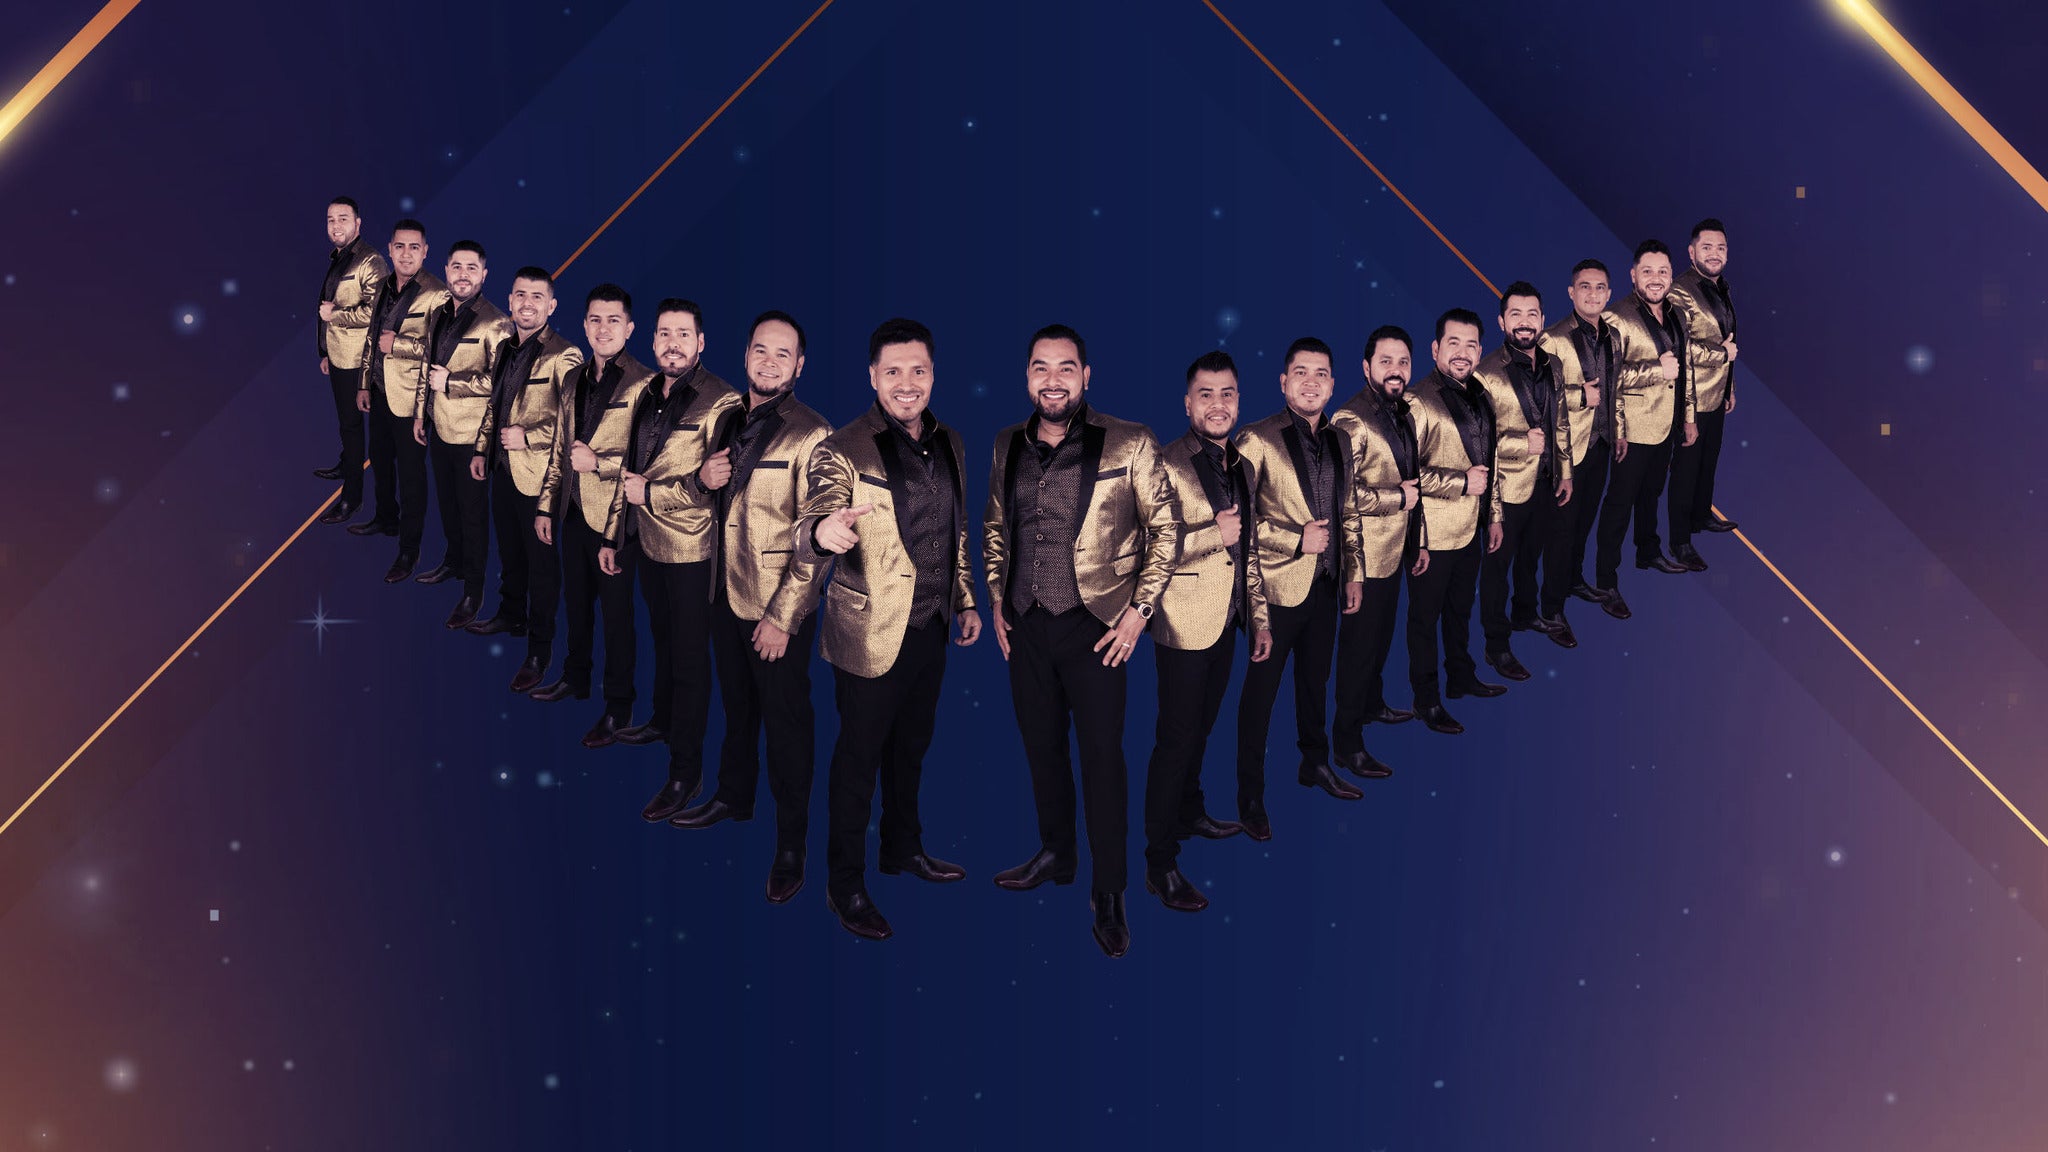 Banda MS - MS20 Tour presale code for advance tickets in Indianapolis